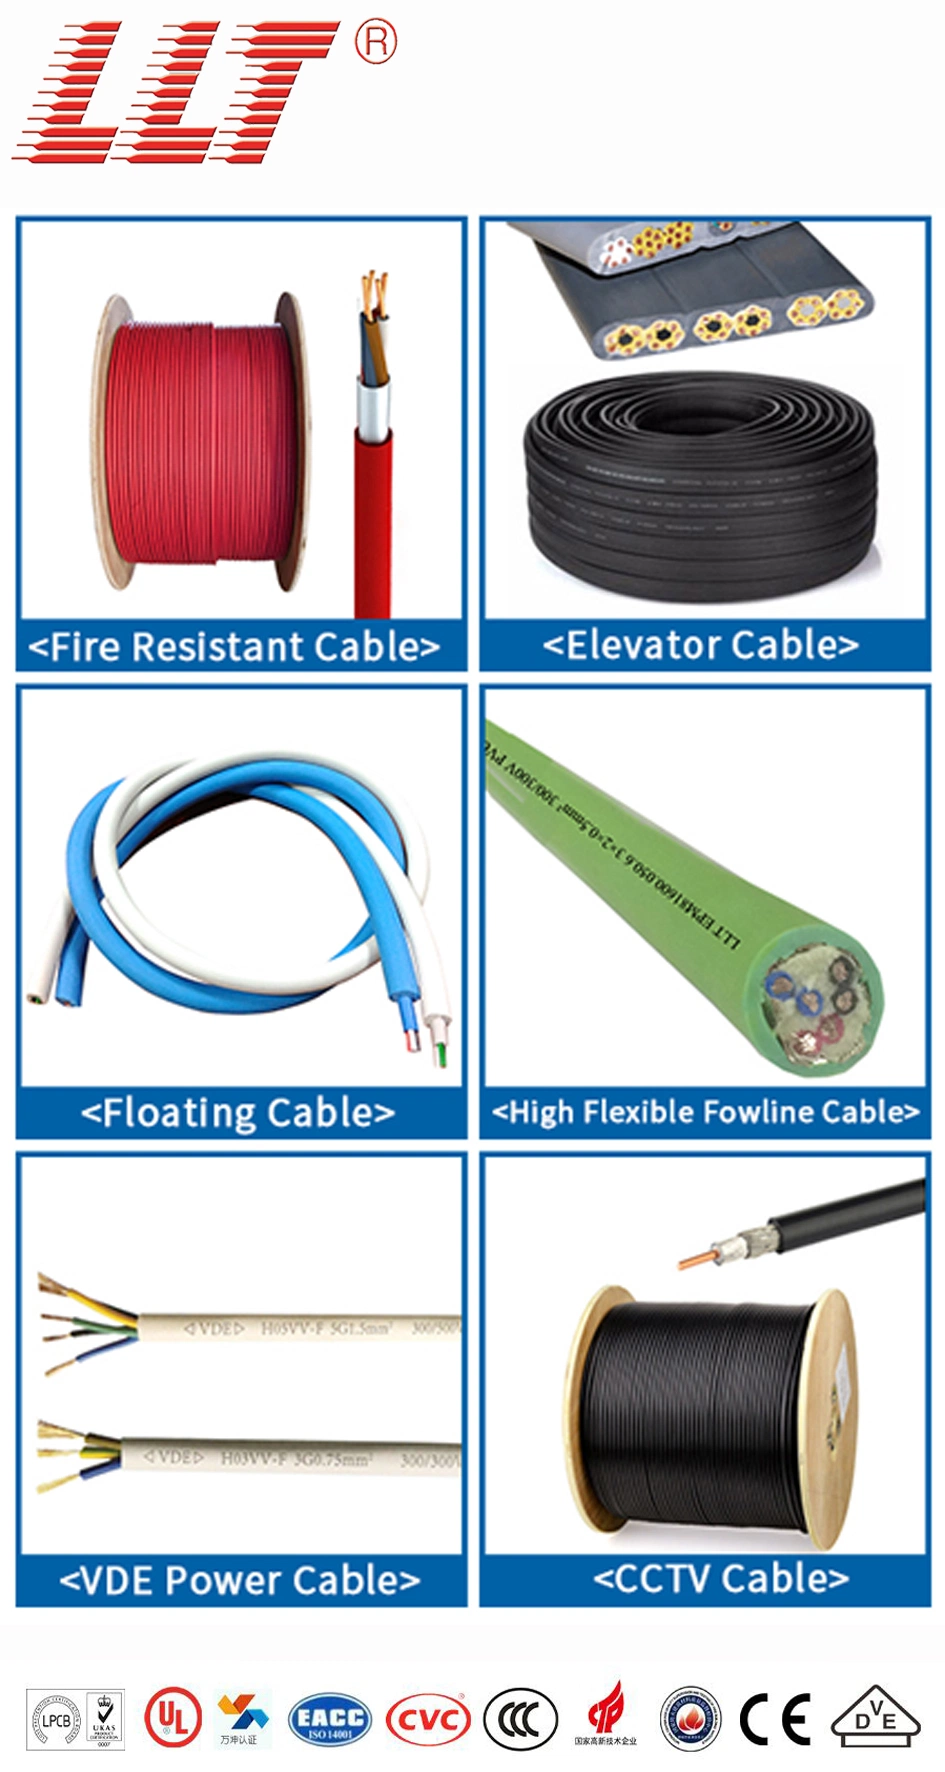 3c 2.5 Silicone Electrical Wire 2 Core Tinned Copper Wire Fire Alarm Cable for Fire Control System